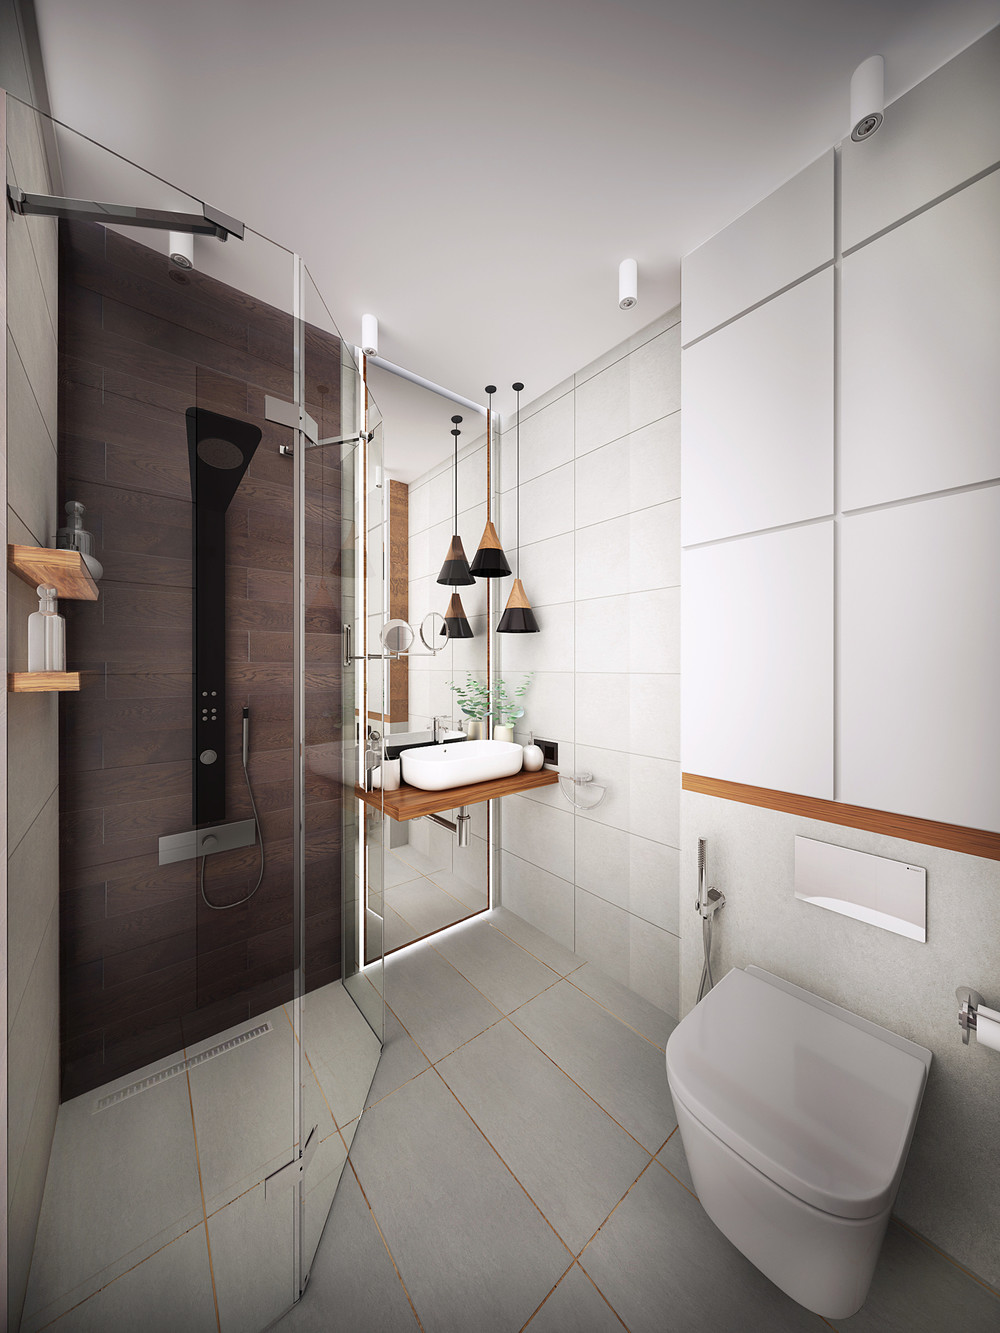 white bathroom with glass shower "width =" 1000 "height =" 1333 "srcset =" https://mileray.com/wp-content/uploads/2020/05/1588516143_8_Inspiration-For-Bathroom-Decorating-Ideas-With-an-Attractive-Design-Showing.jpg 1000w, https://mileray.com/ wp -content / uploads / 2016/09 / DesignRush-225x300.jpg 225w, https://mileray.com/wp-content/uploads/2016/09/DesignRush-768x1024.jpg 768w, https://mileray.com/ wp -content / uploads / 2016/09 / DesignRush-696x928.jpg 696w, https://mileray.com/wp-content/uploads/2016/09/DesignRush-315x420.jpg 315w "Sizes =" (maximum width: 1000px) 100vw, 1000px